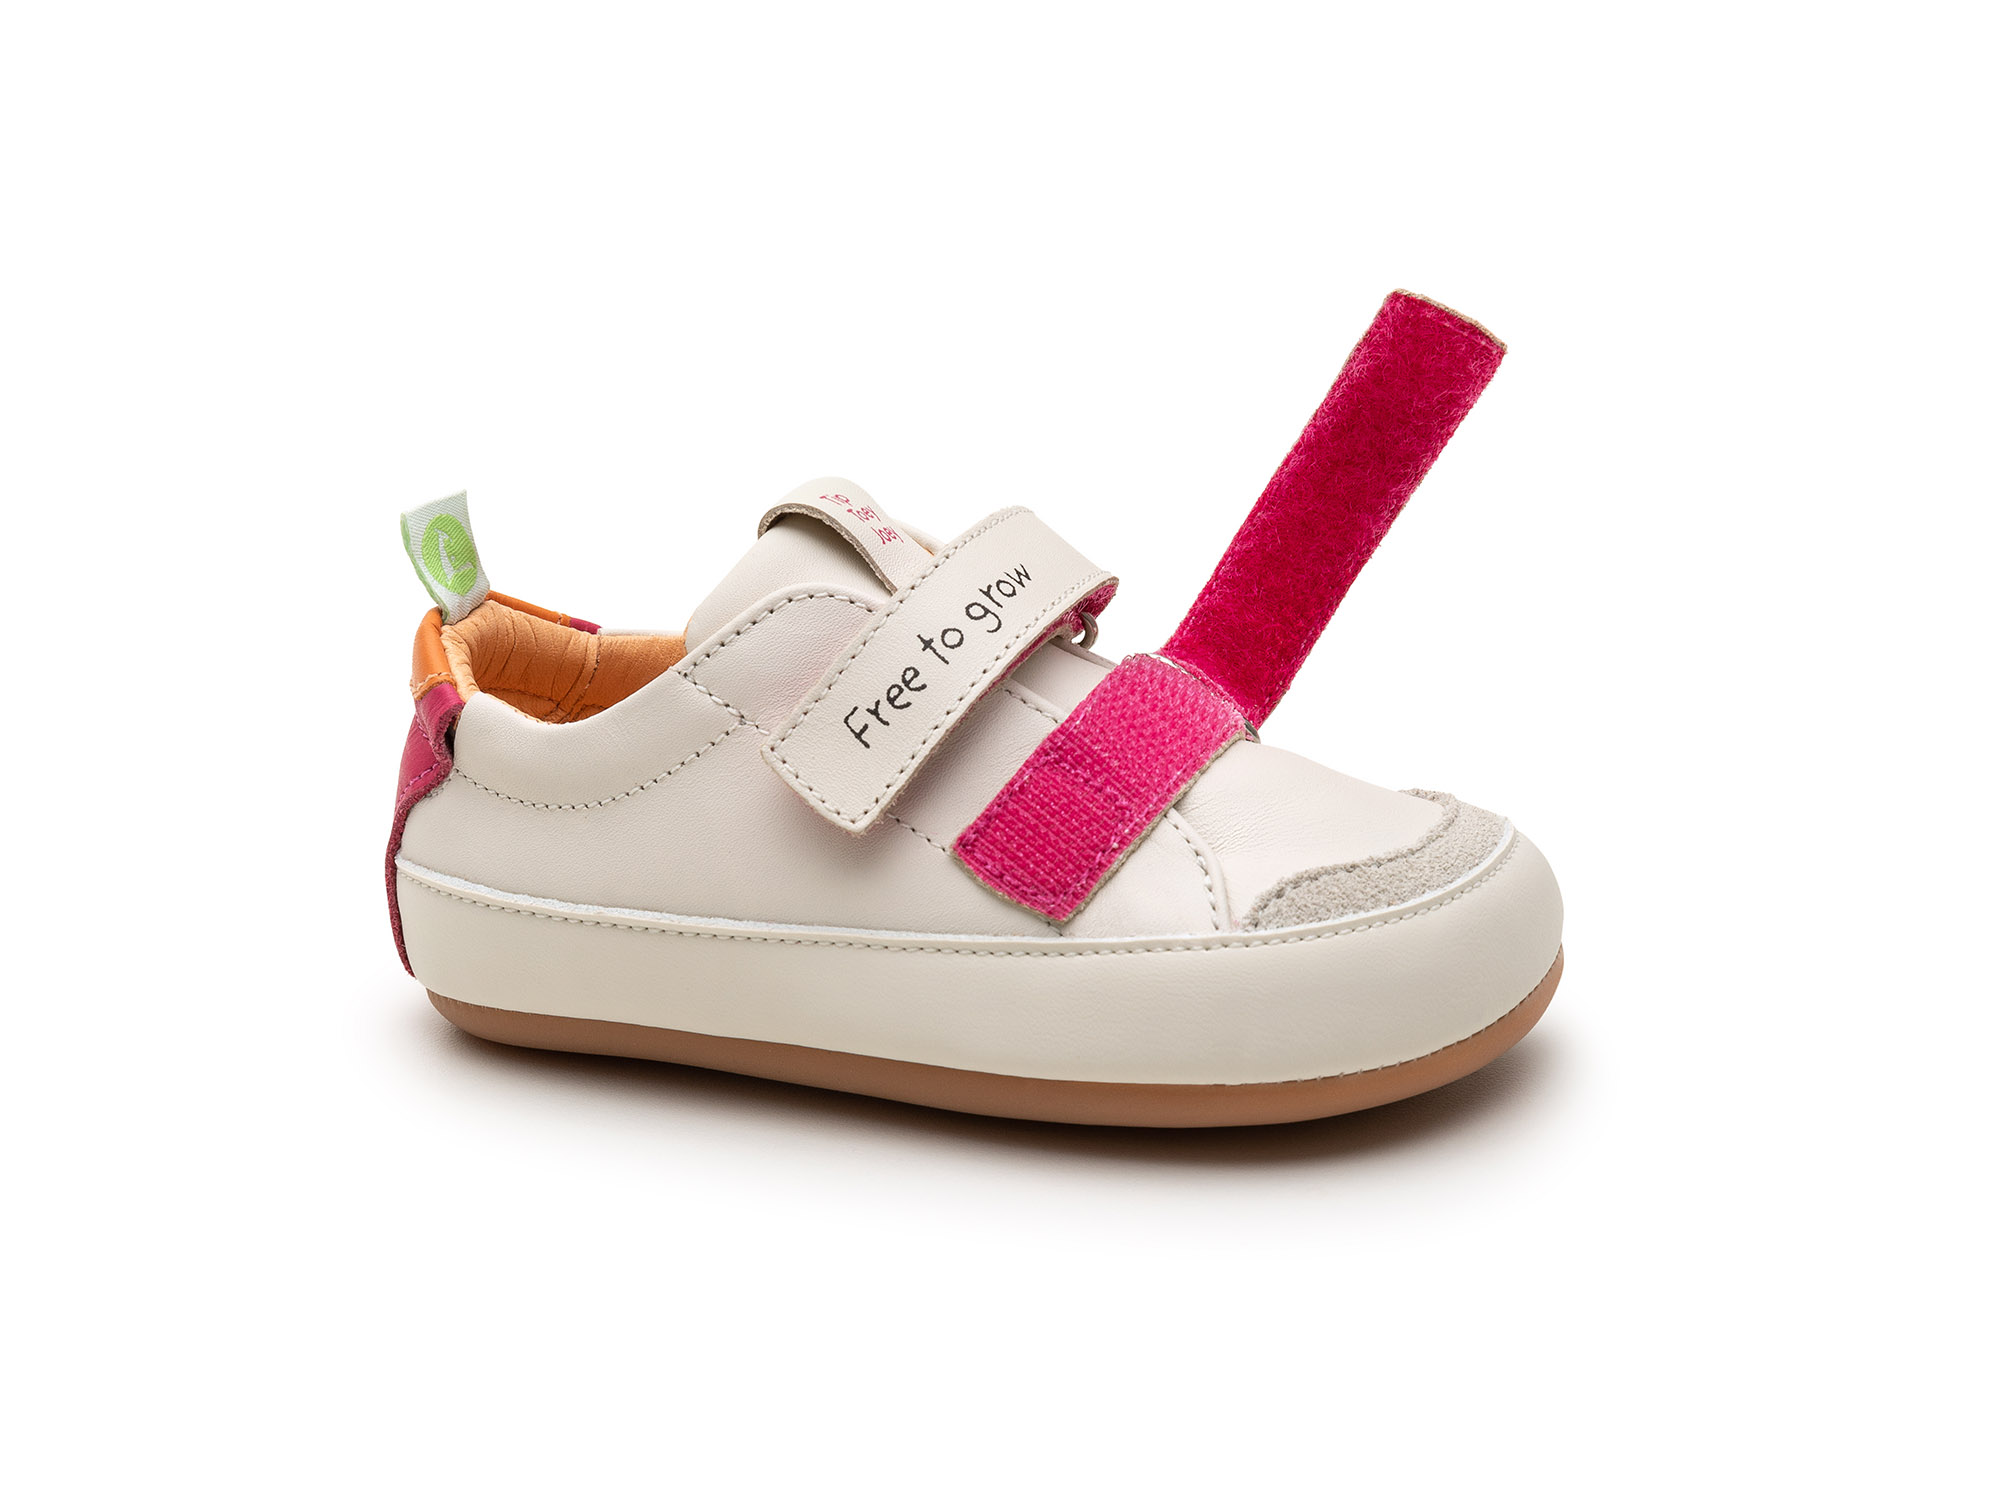 UP & GO Sneakers for Girls Bossy Play | Tip Toey Joey - Australia - 6